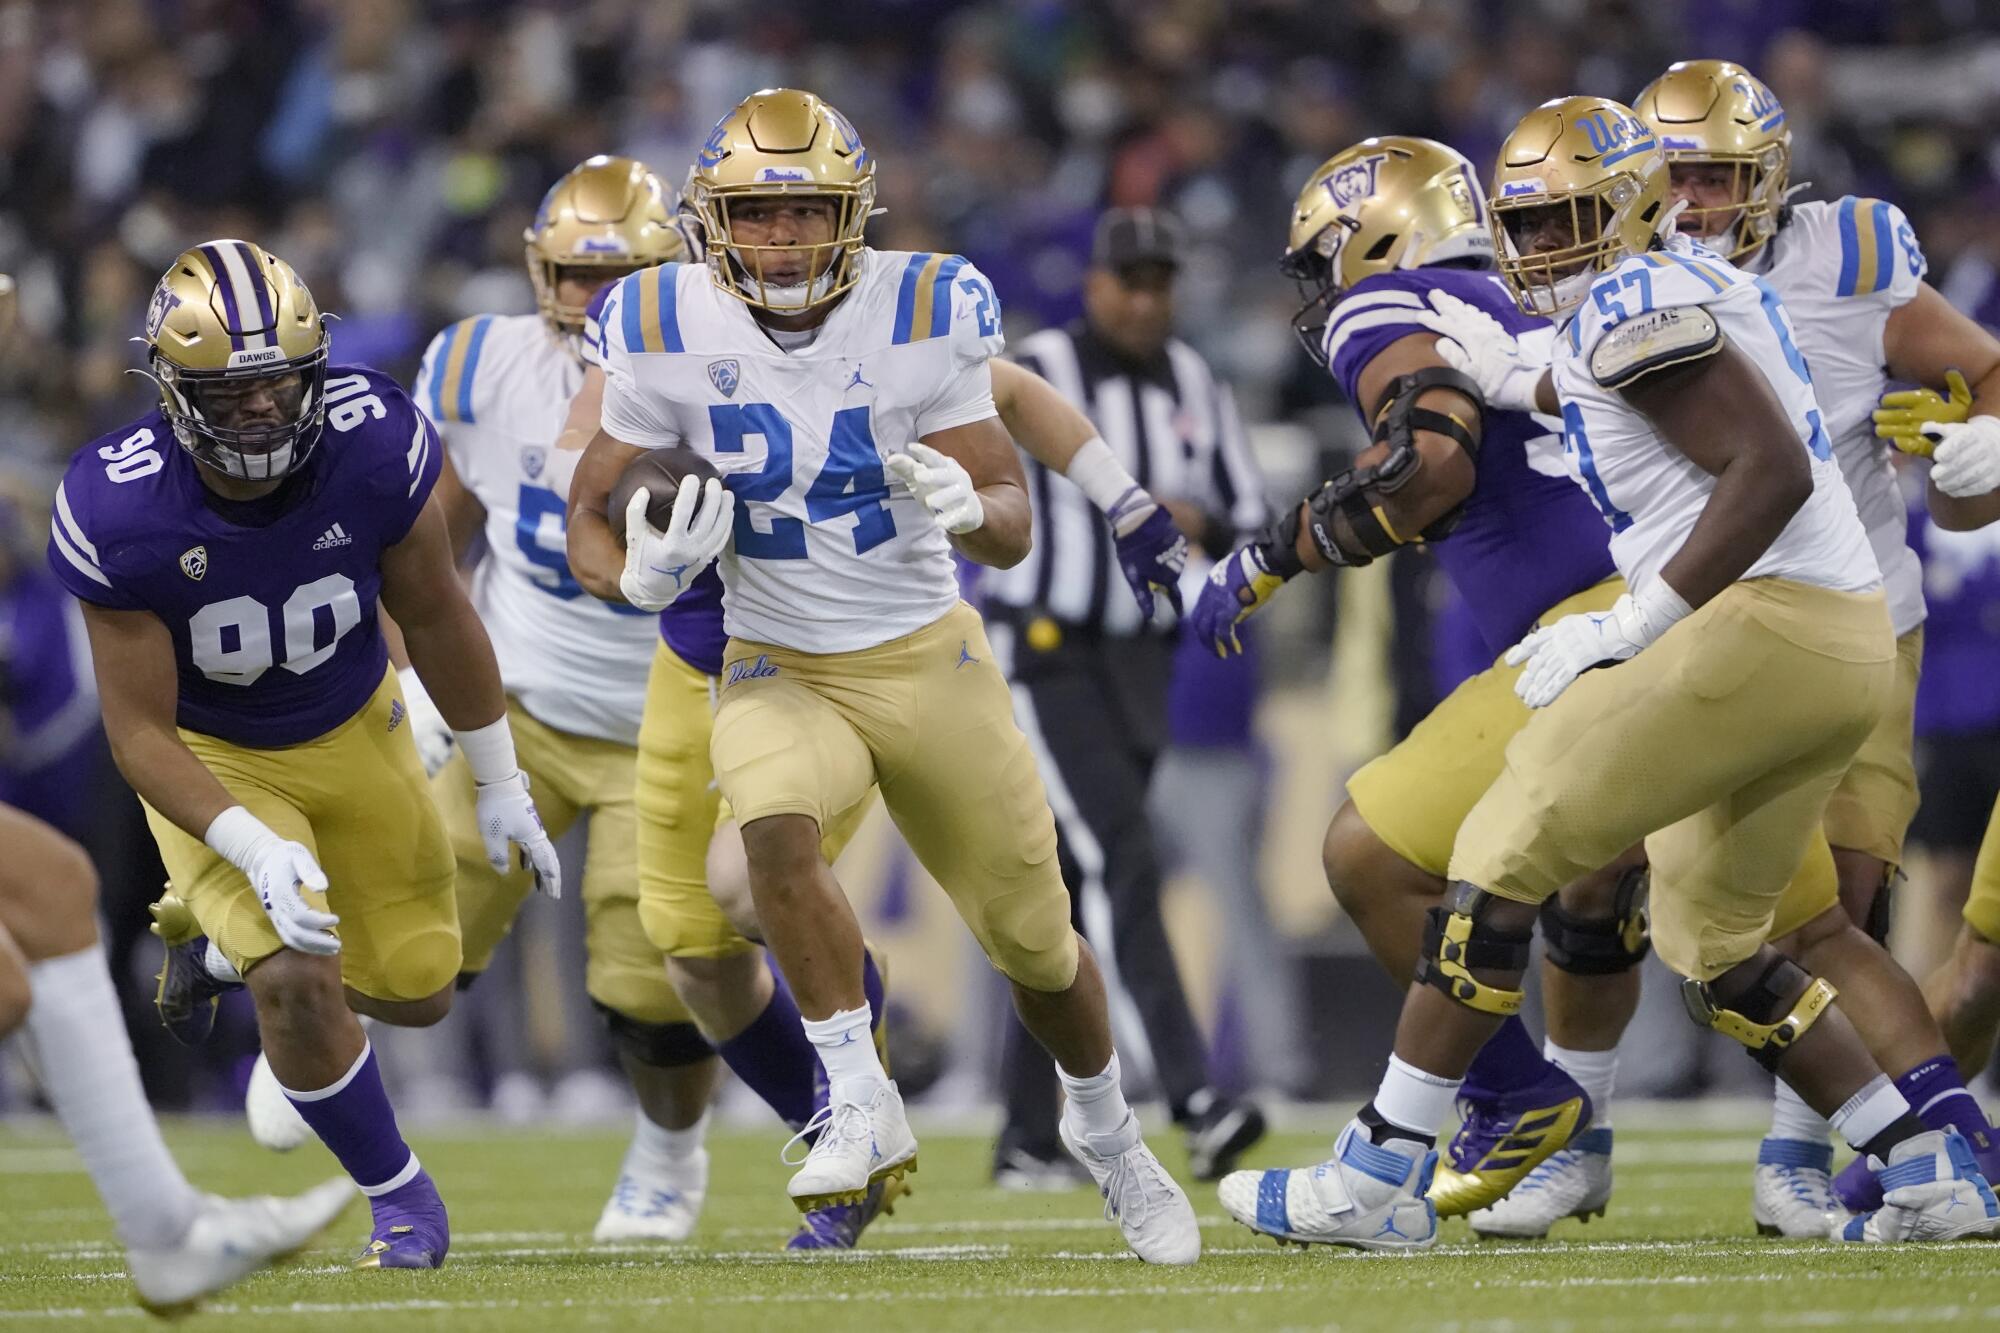 UCLA running back Zach Charbonnet (24) carries the ball against Washington Saturday